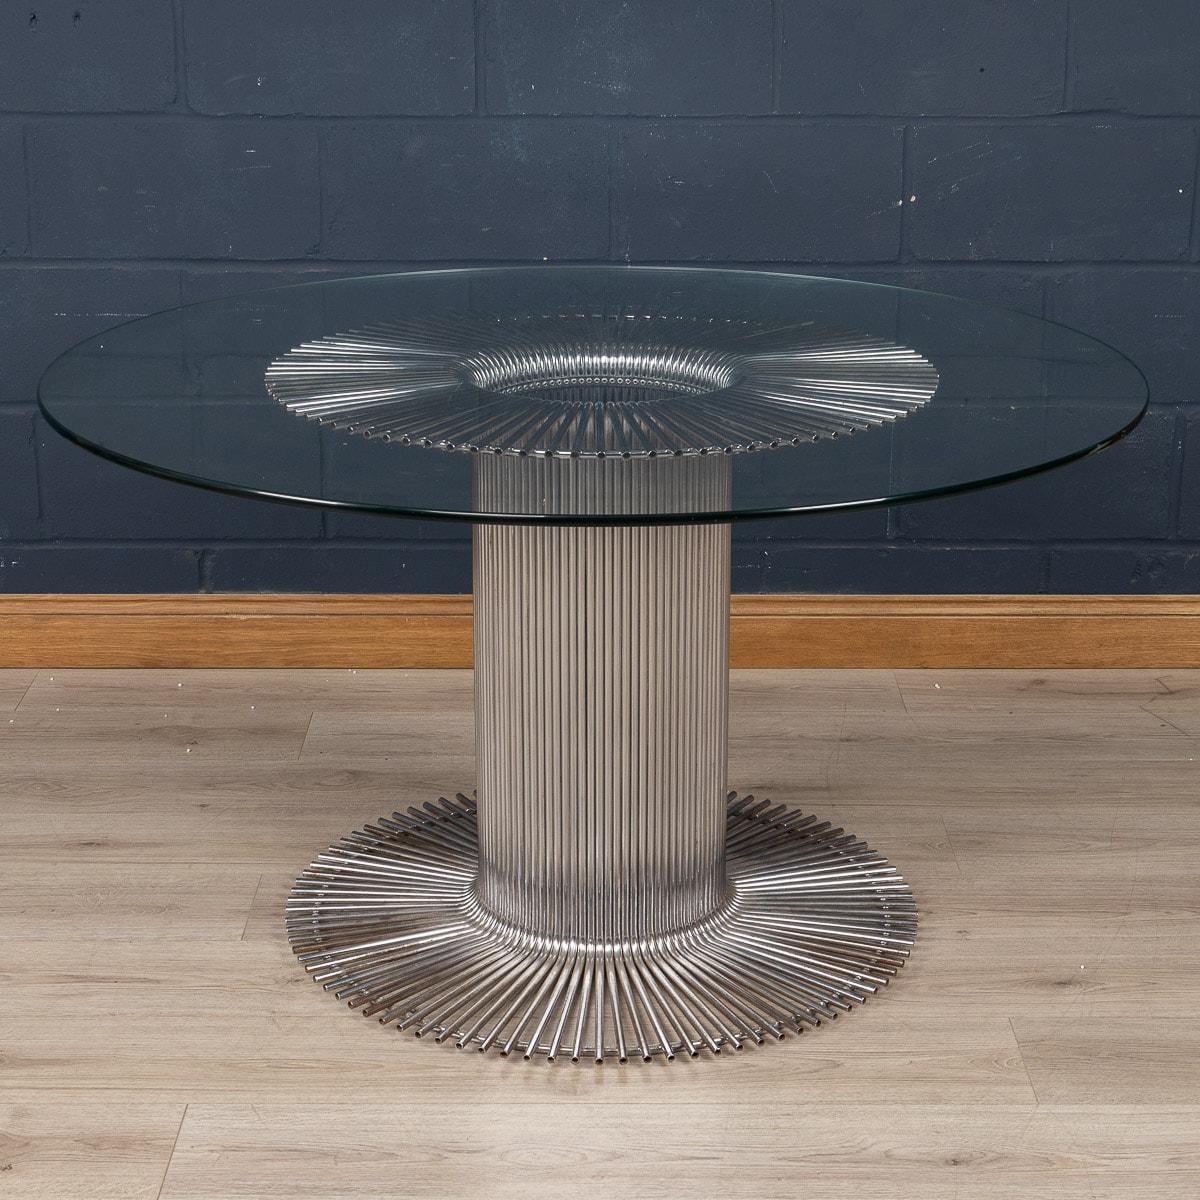 An elegant dining table designed by Gastone Rinaldi for RIMA, Italy, circa 1970. Known for blending industrial design with art, the tubular structure of the table is emblematic of Rinaldi’s work. Dozens of chromed tubes scrunched together to form a